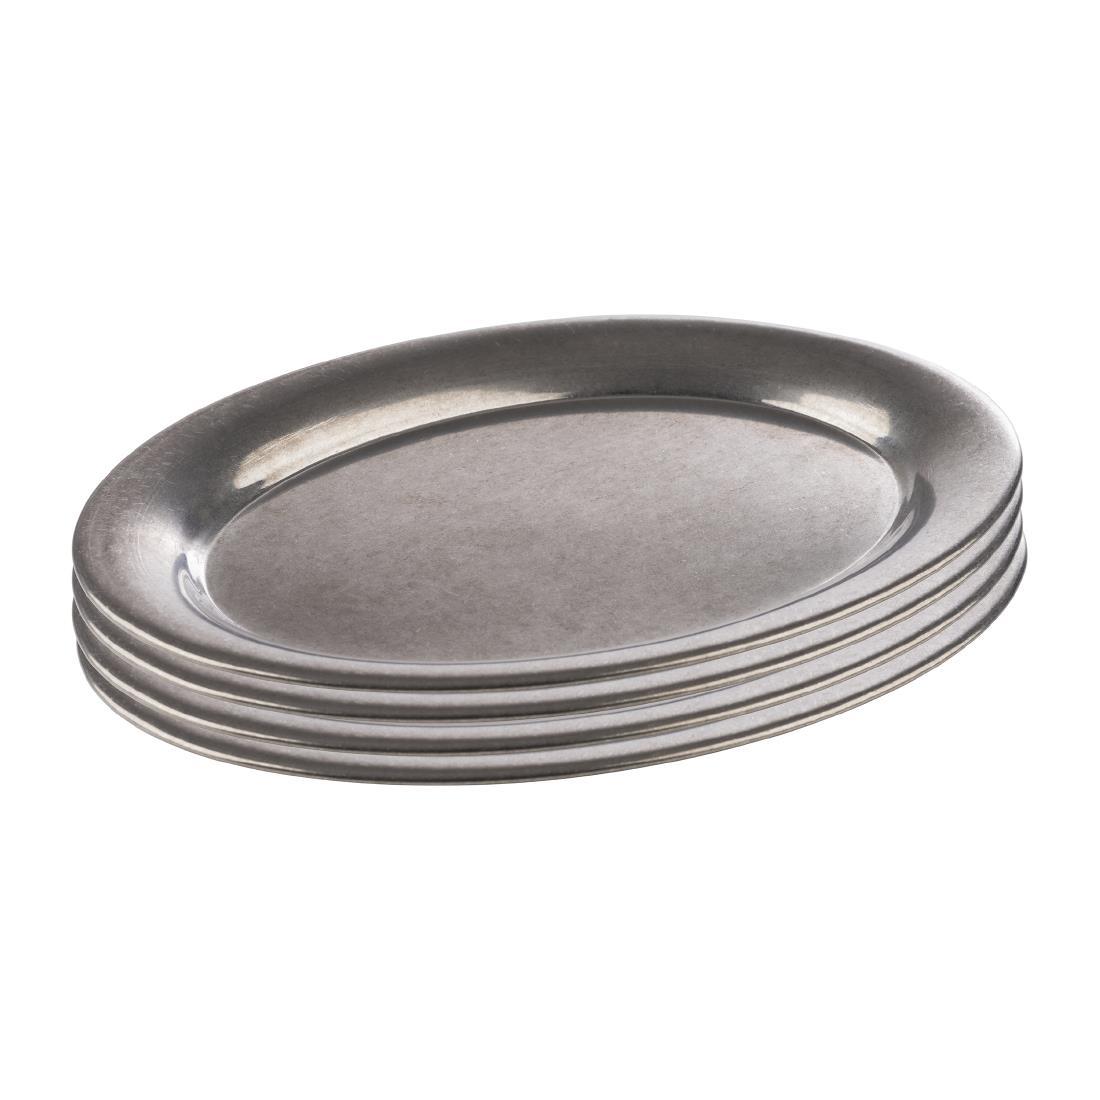 APS Coffeehouse Vintage Tray 200 x 145mm - FT171  - 2